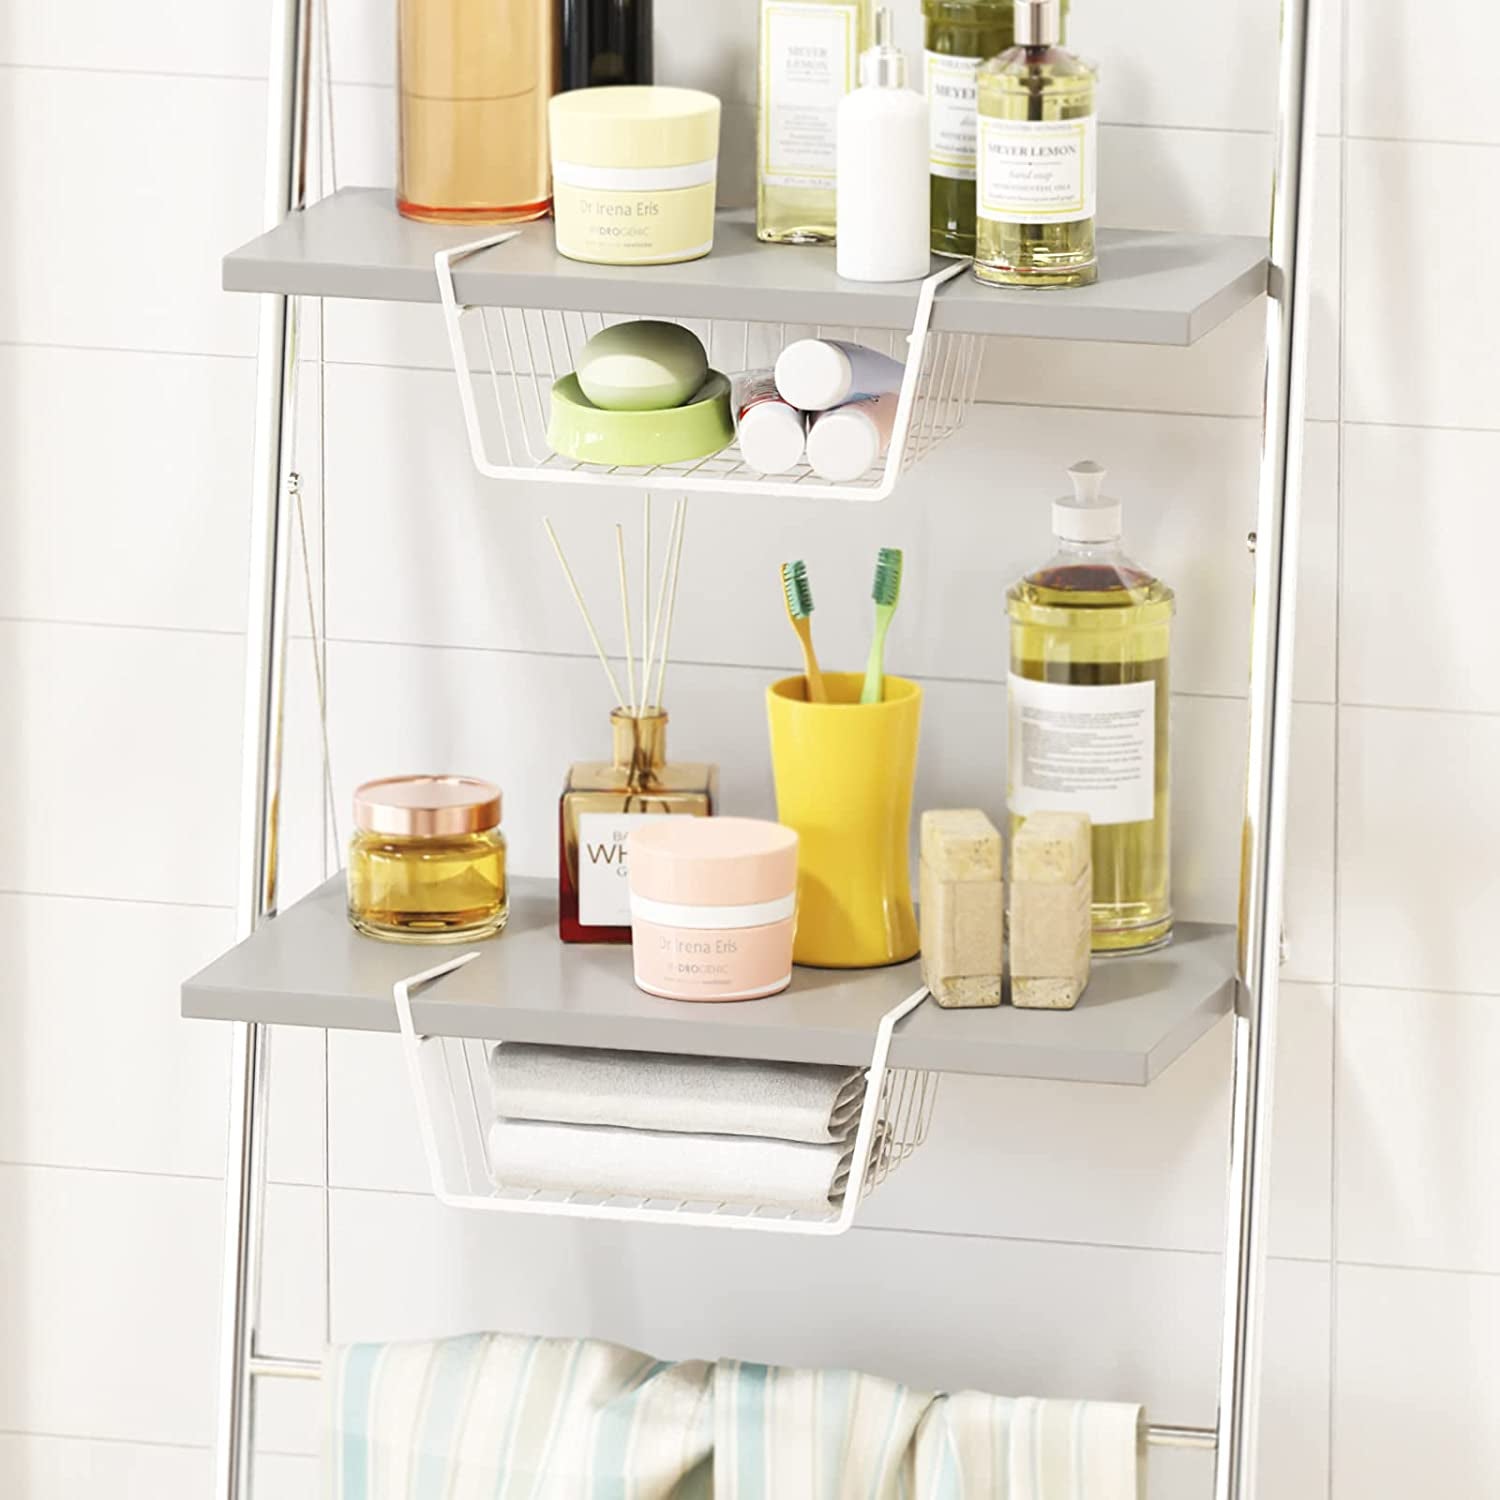 Best Shower Shelves for Organizing Your Bathroom Essentials - The